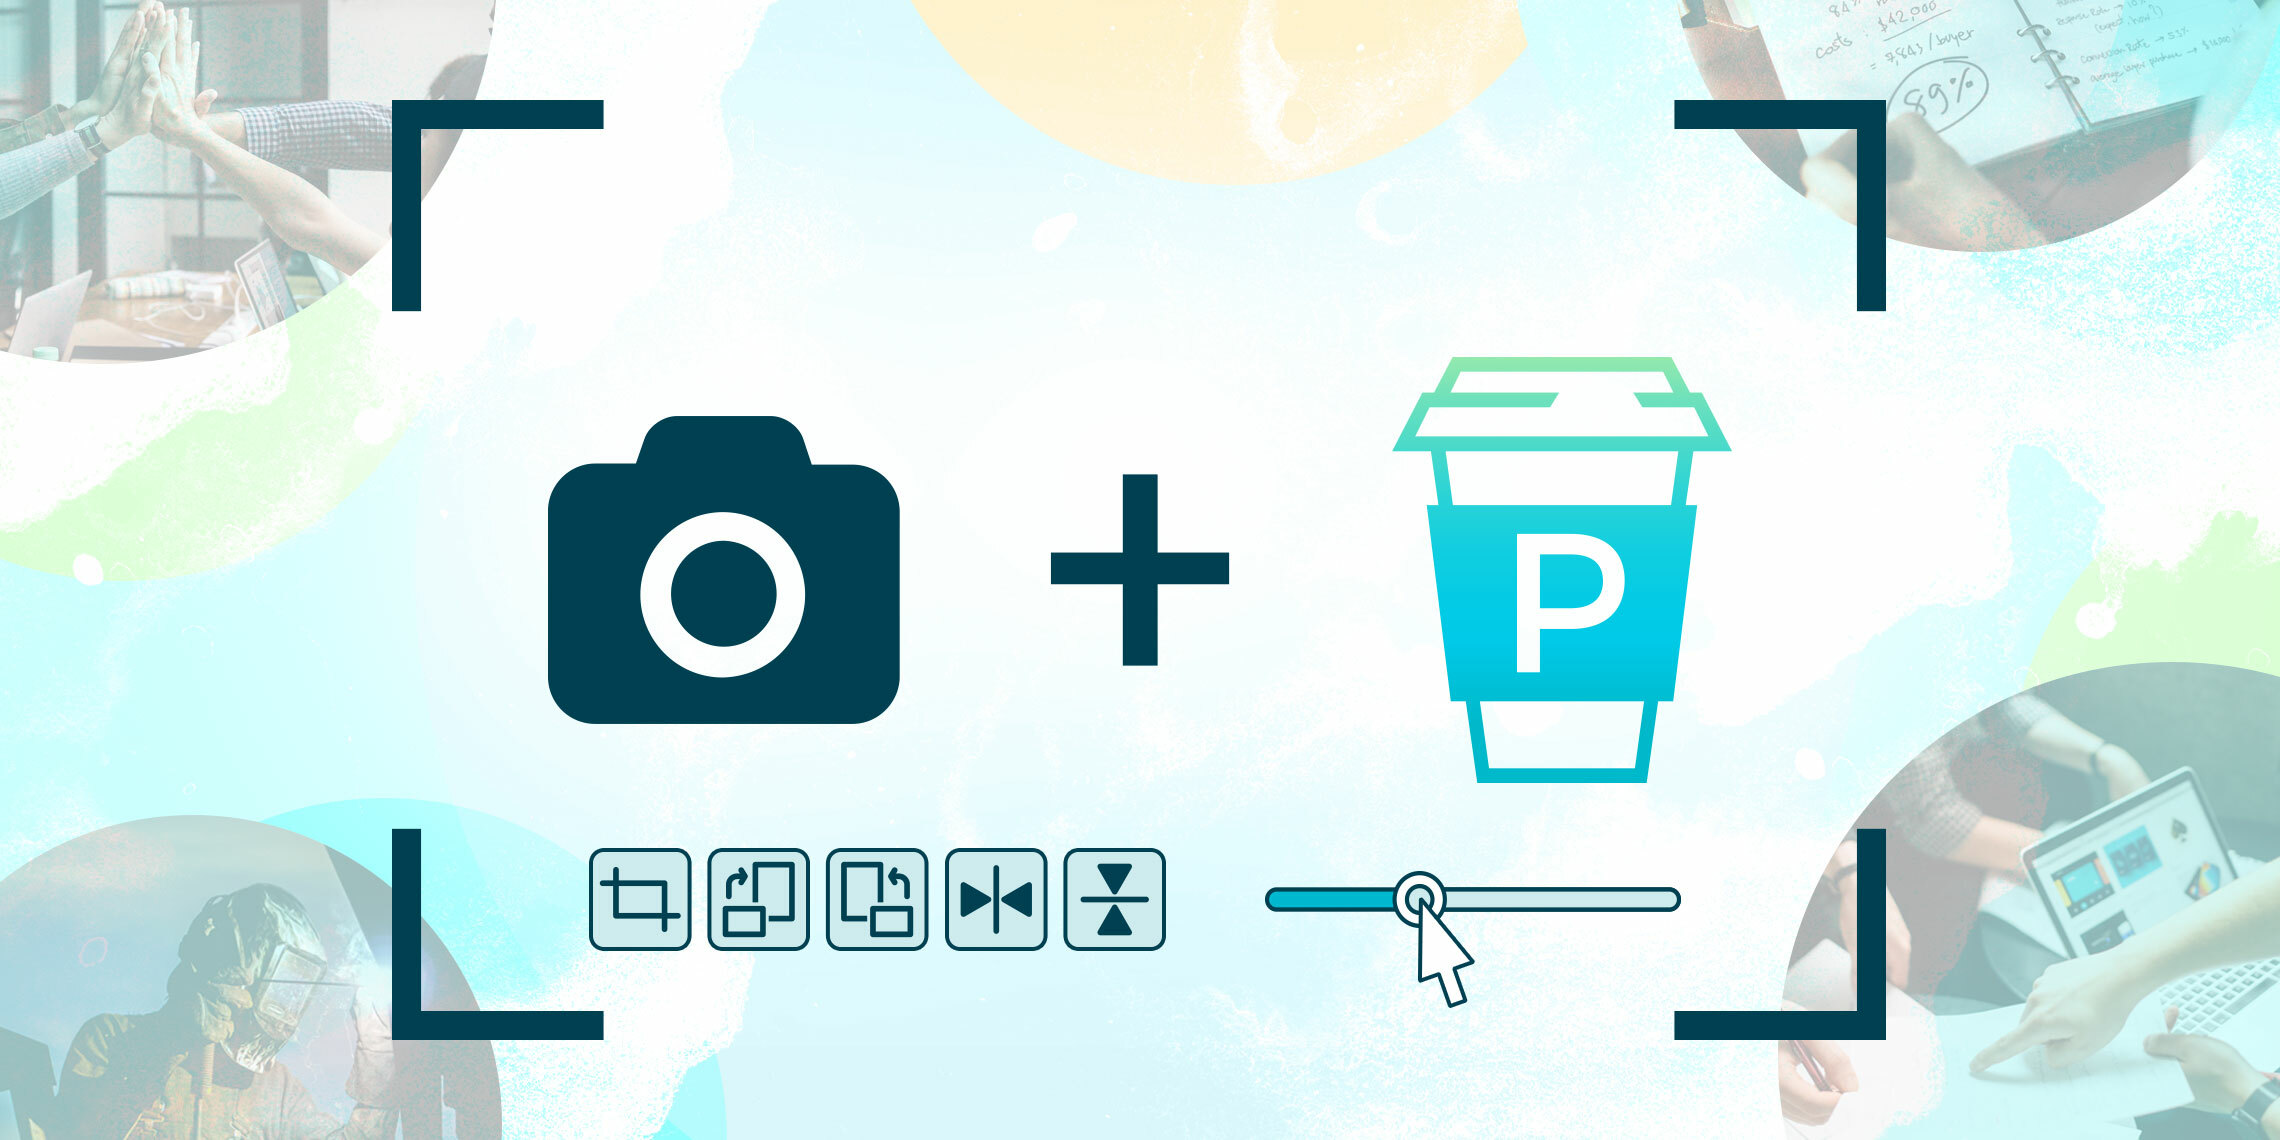 proposify image integration with unsplash photo editor cropping icons